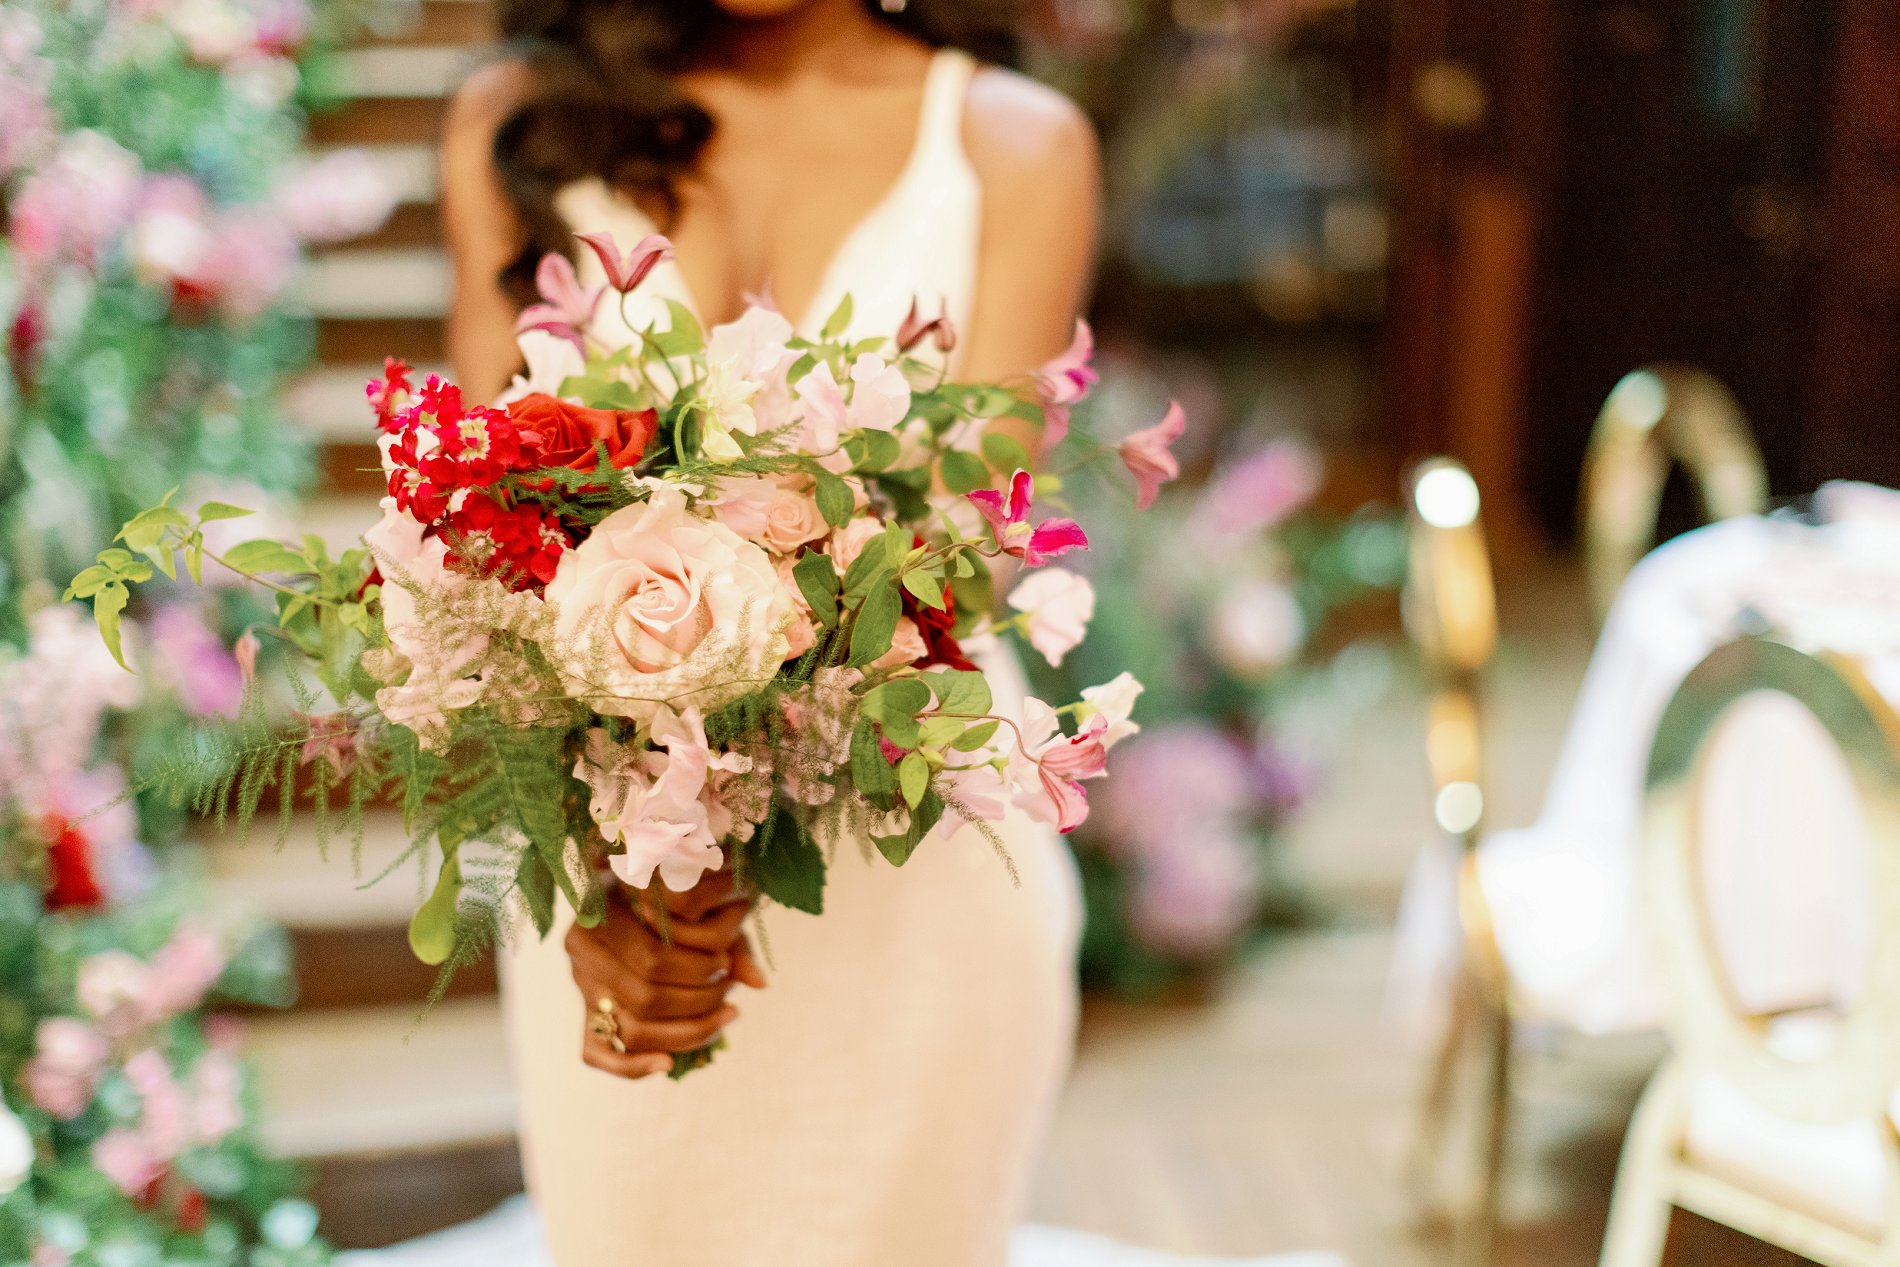 Forever Yours Styled Shoot (c) Camilla J. Hards and Courtney Dee Photography (32)